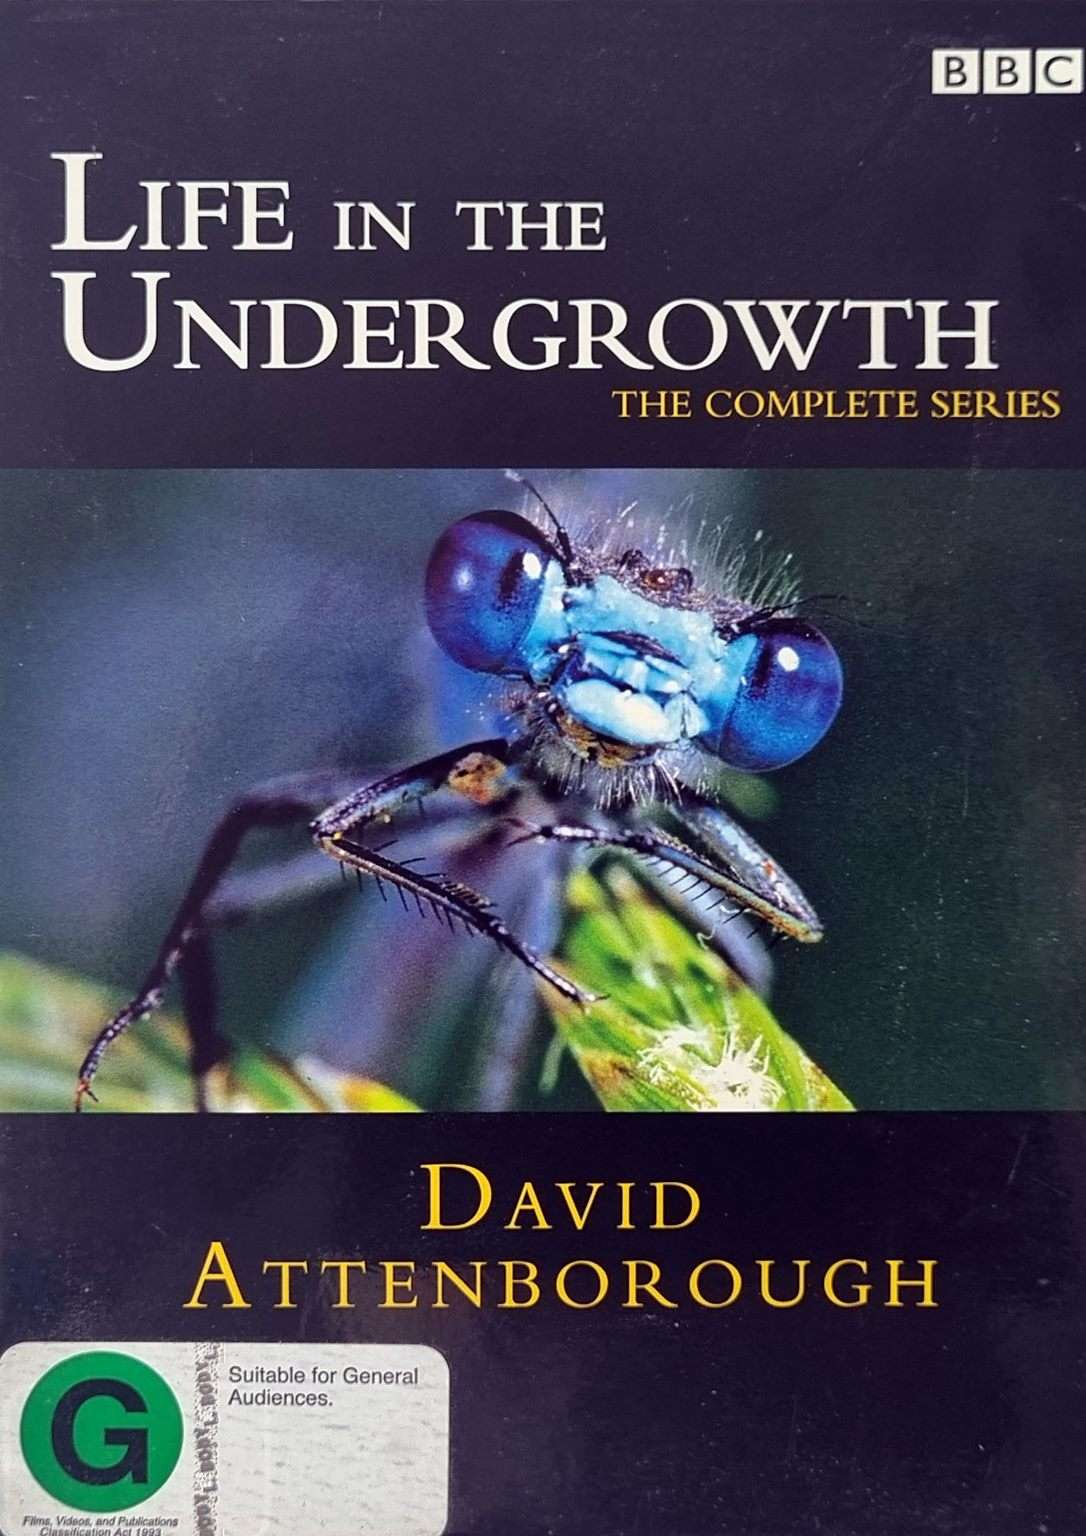 Life in the Undergrowth: The Complete Series David Attenborough